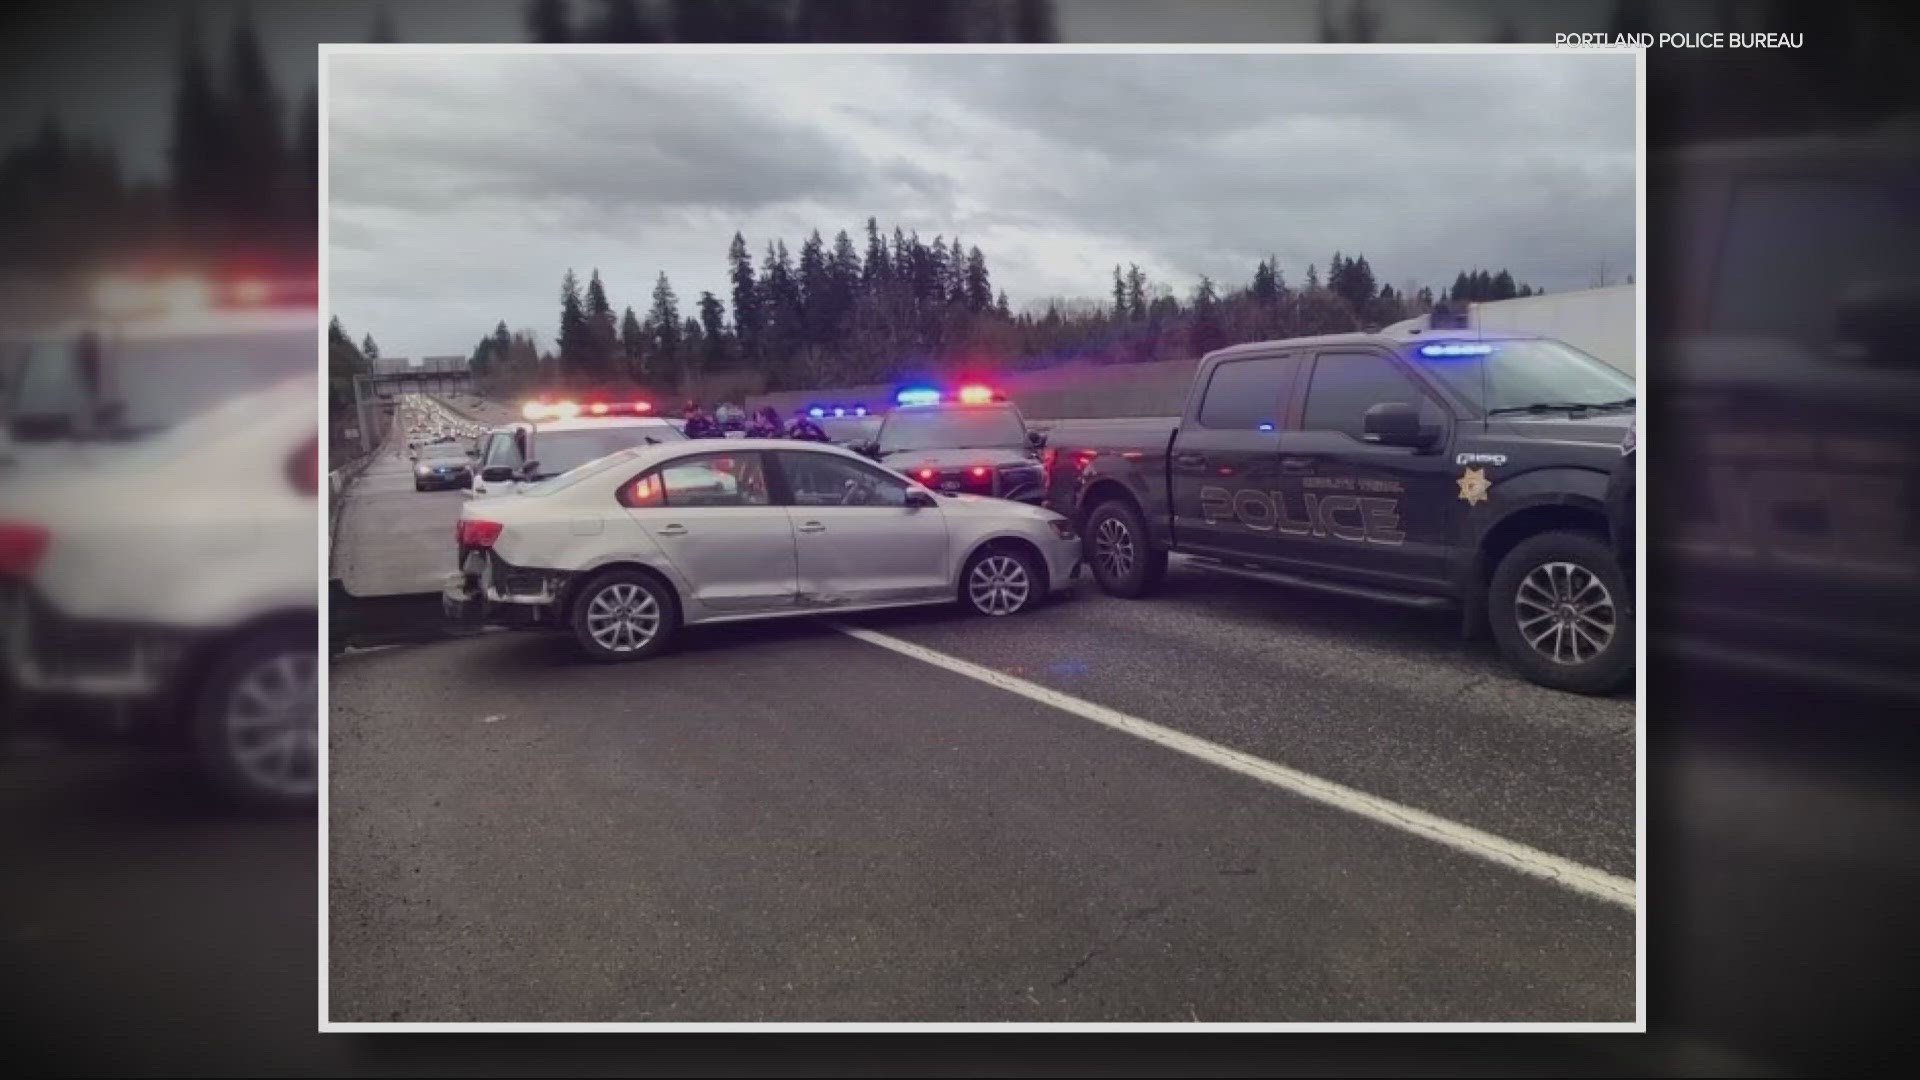 Two children were able to escape from a car after it was stolen in North Portland on Monday afternoon, the Portland Police Bureau reported.